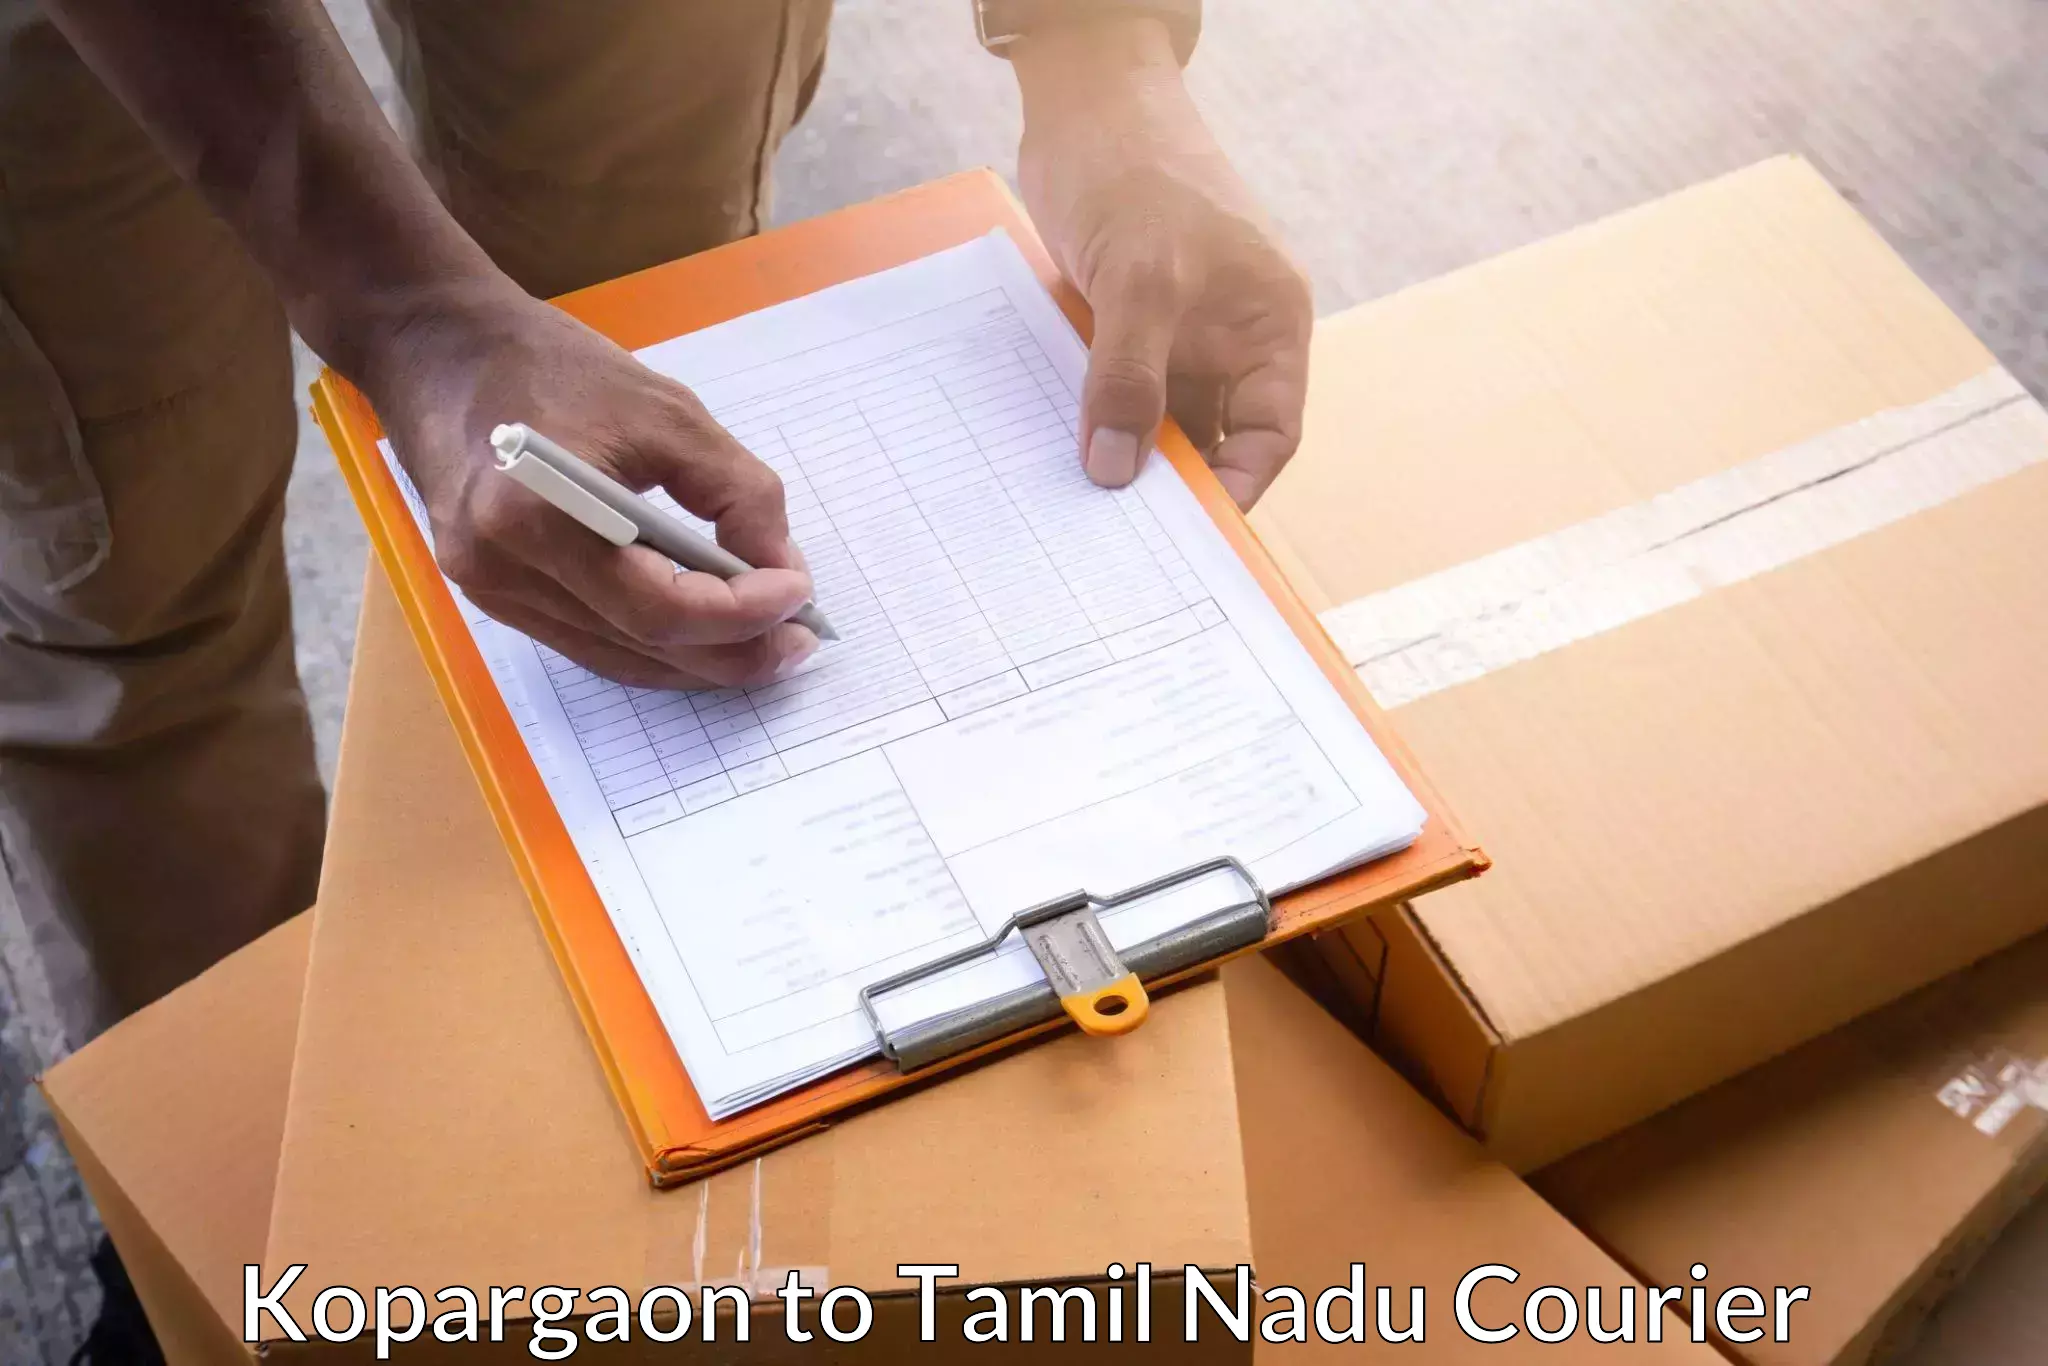 Customer-focused courier Kopargaon to Bharath Institute of Higher Education and Research Chennai